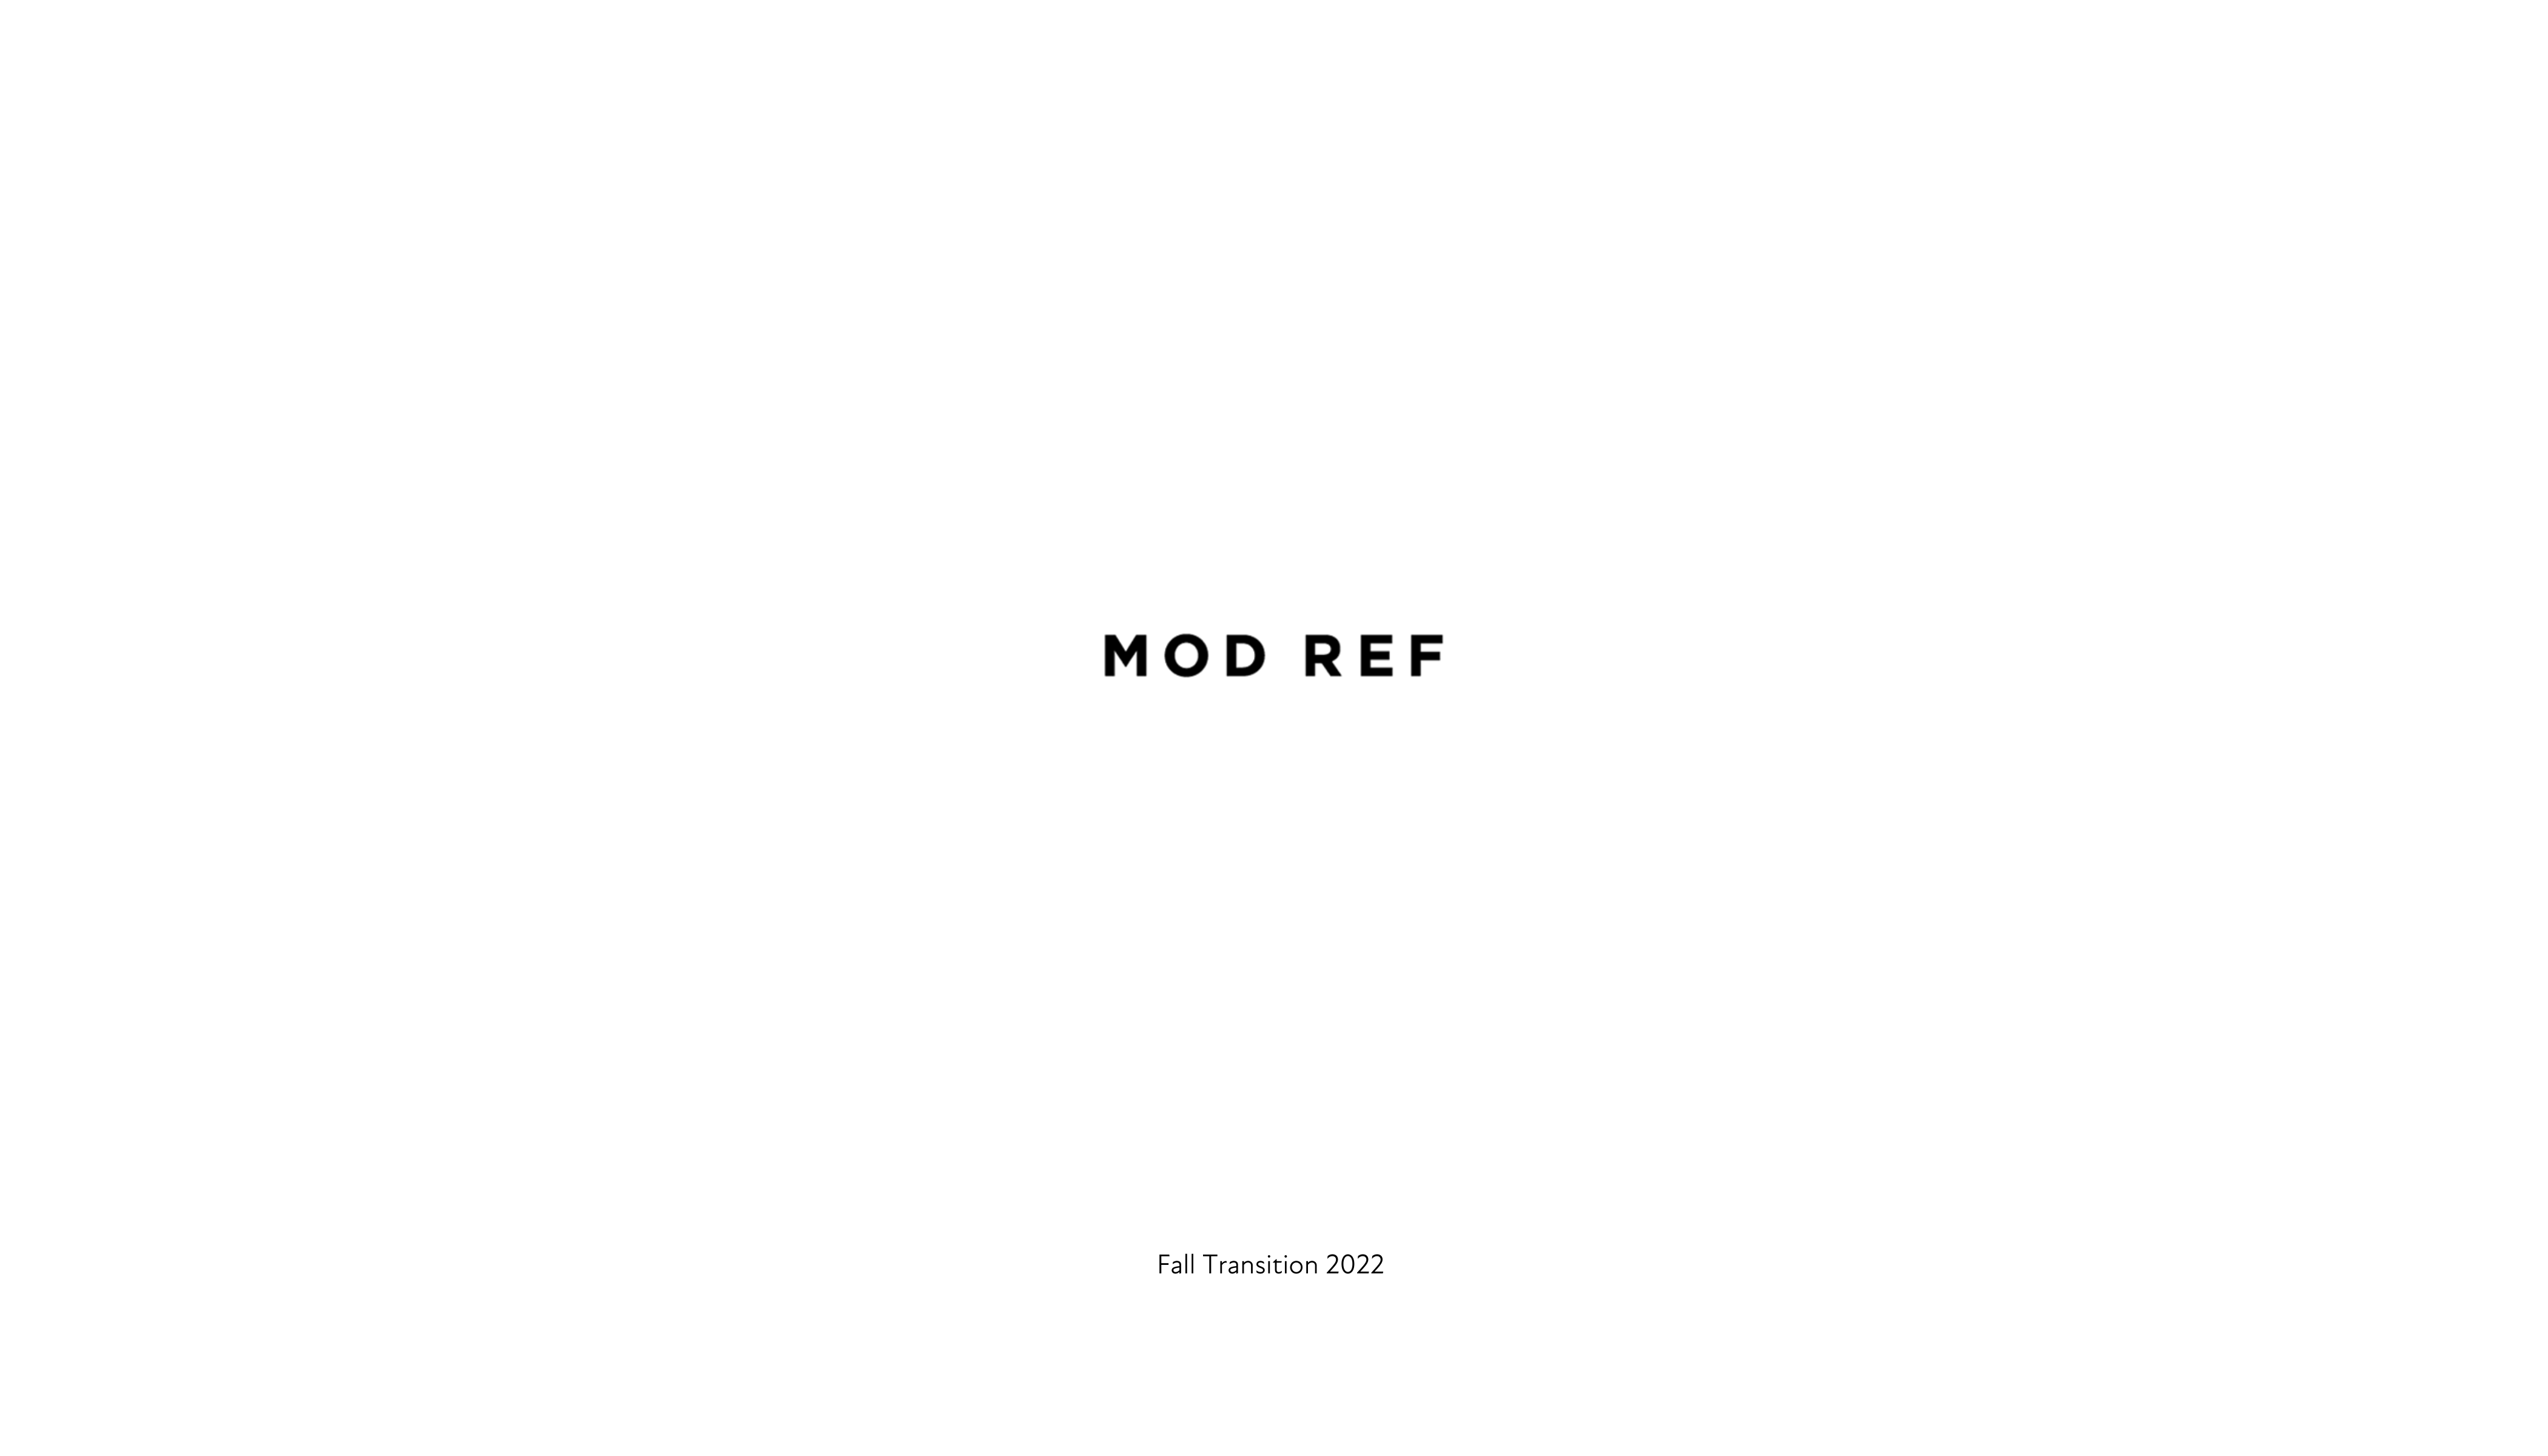 MOD REF Fall Transition - Cover